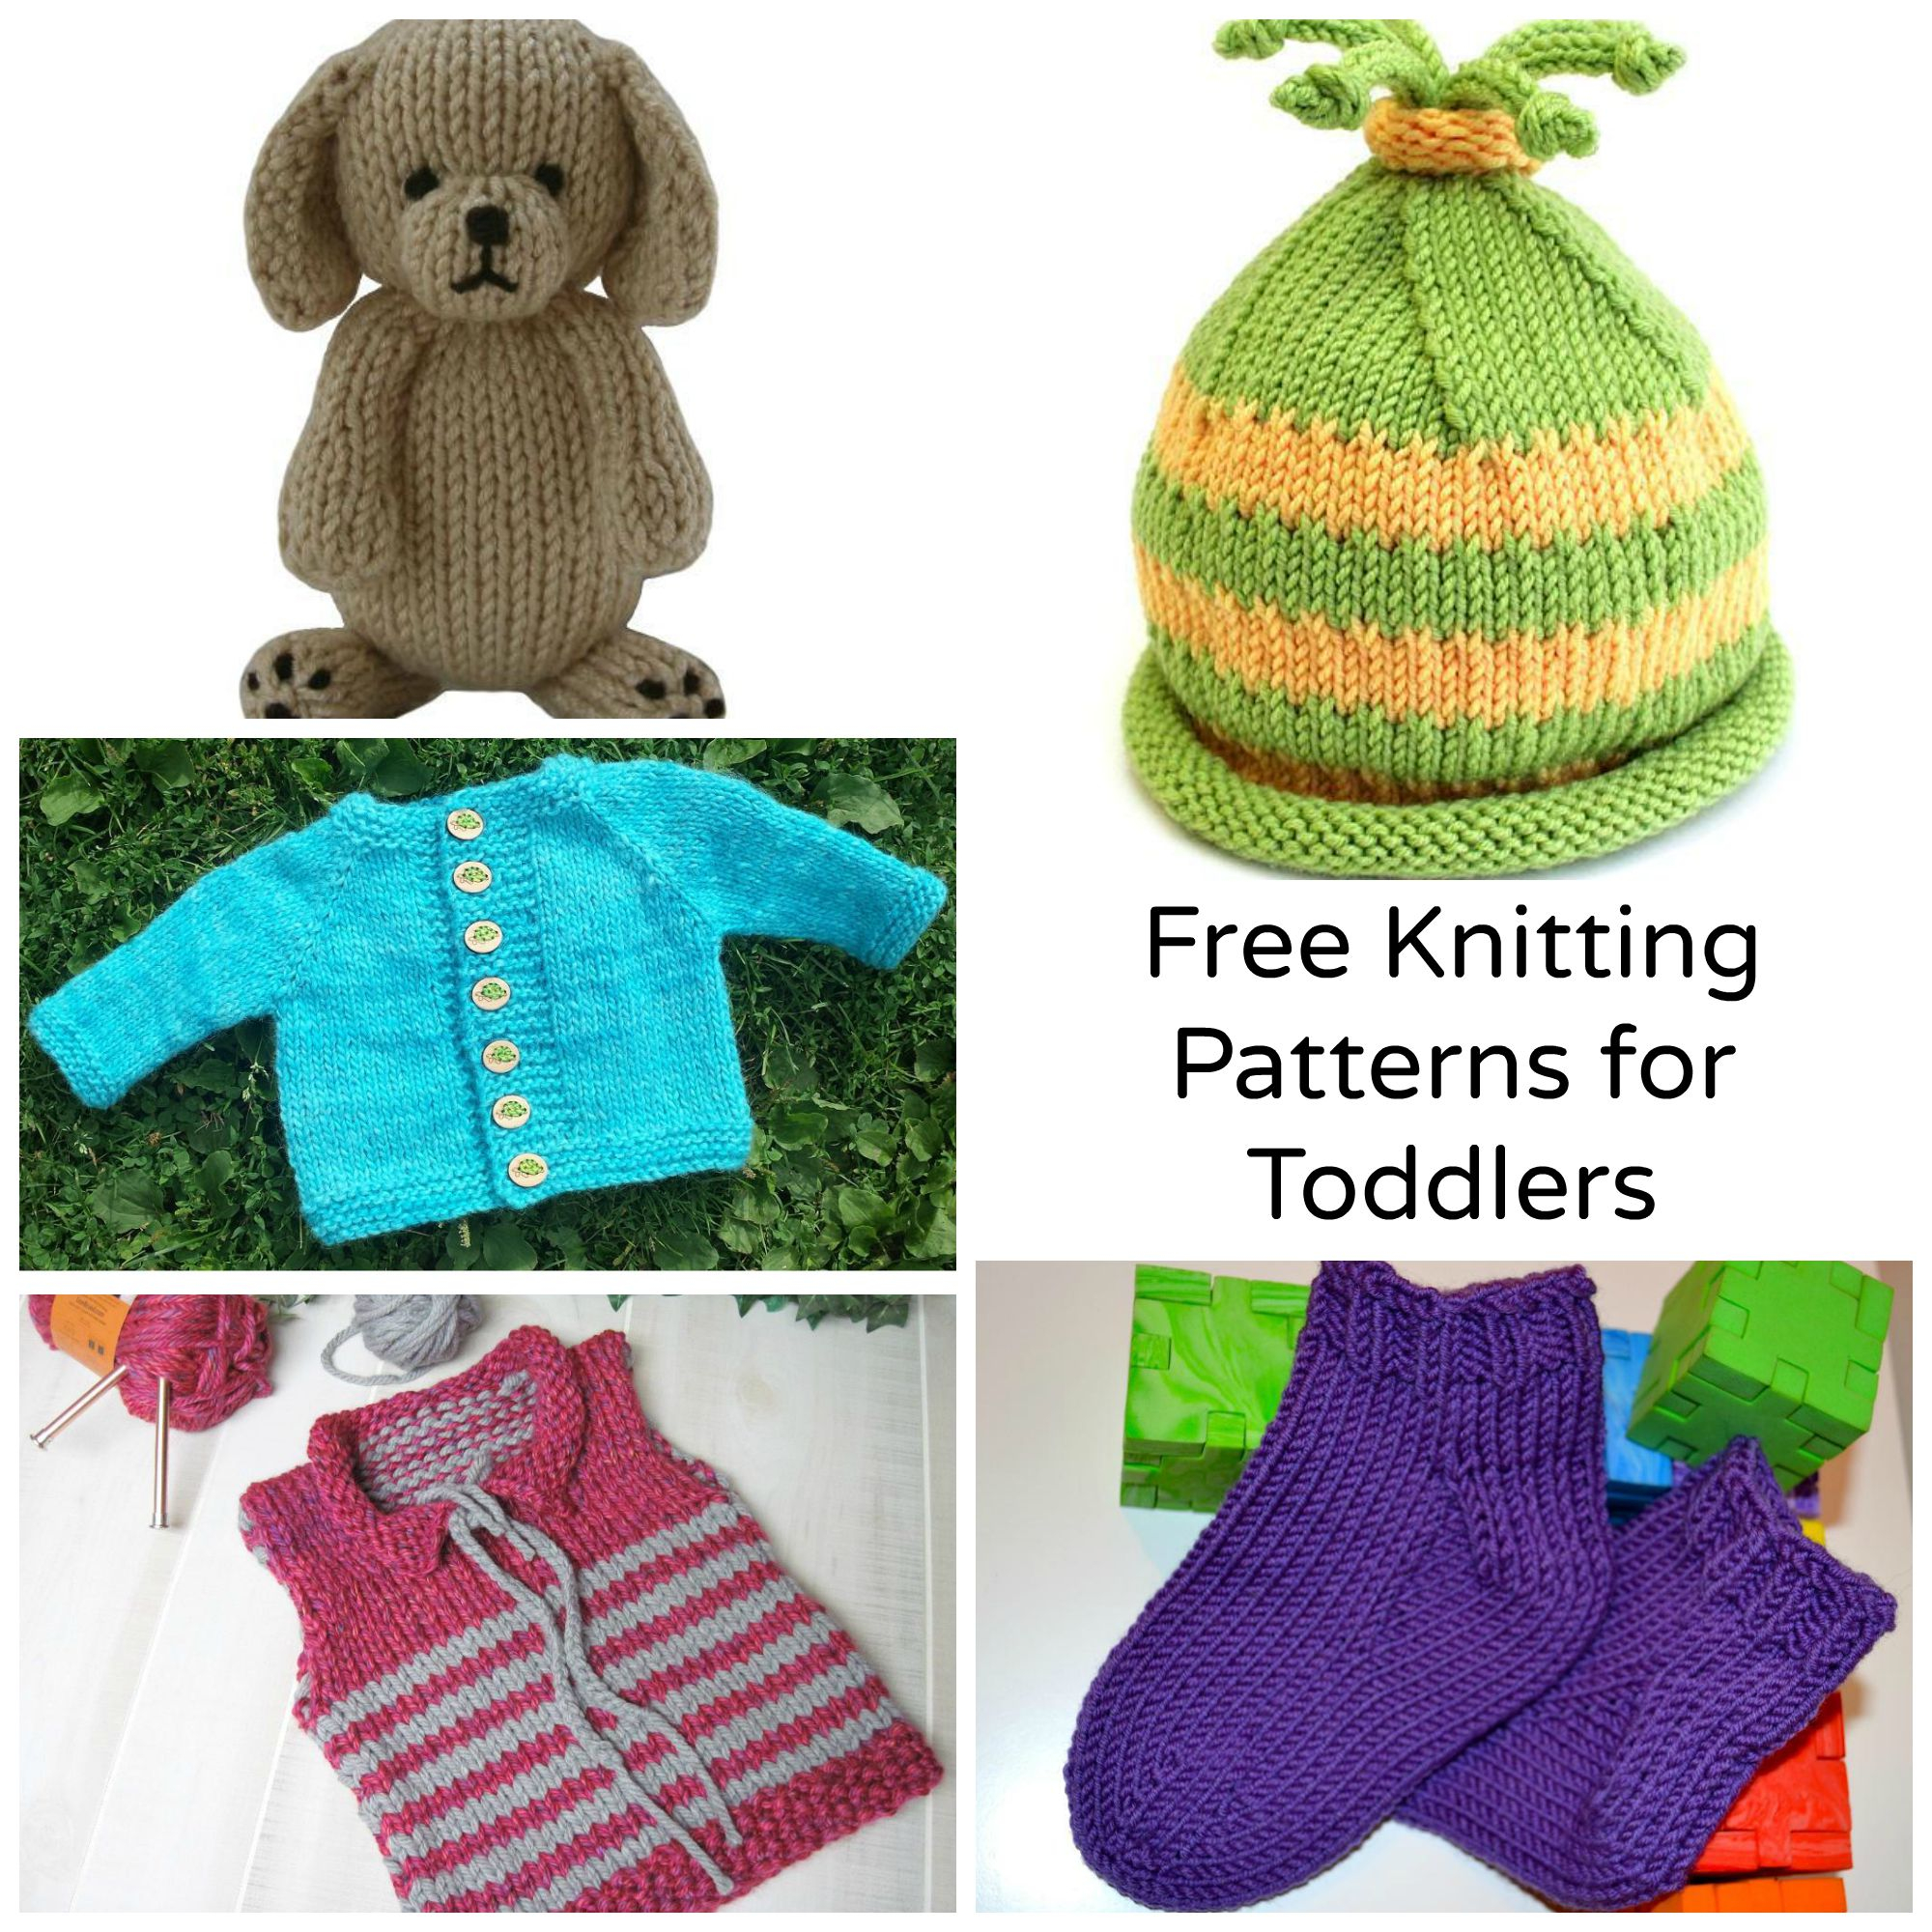 Patterns Knitting Free 7 Sweet Free Knitting Patterns For Toddlers Craftsy